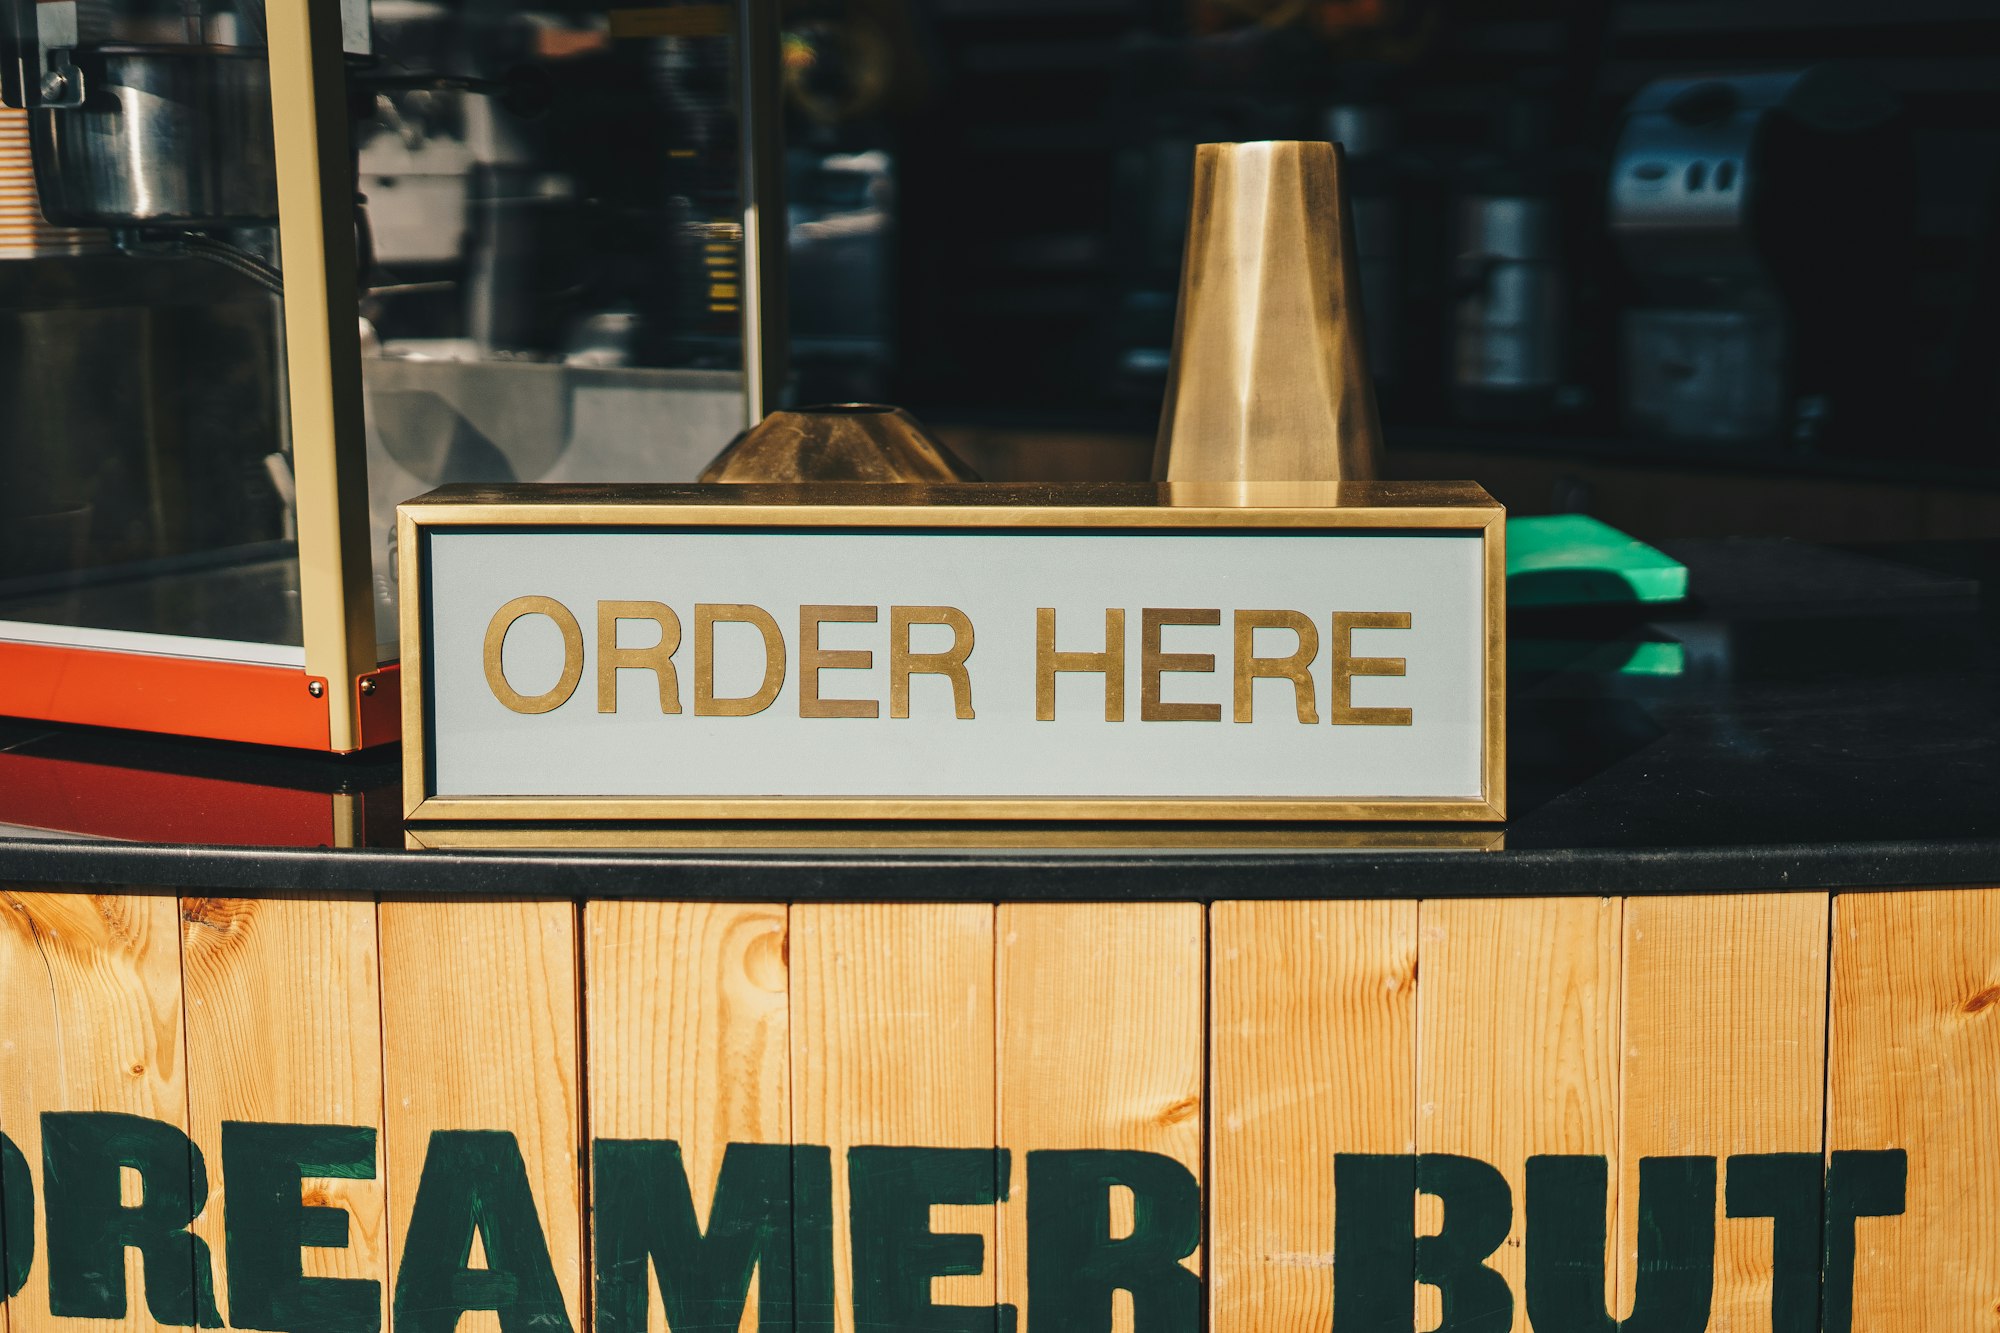 A sign in a restaurant that reads 'ORDER HERE'.